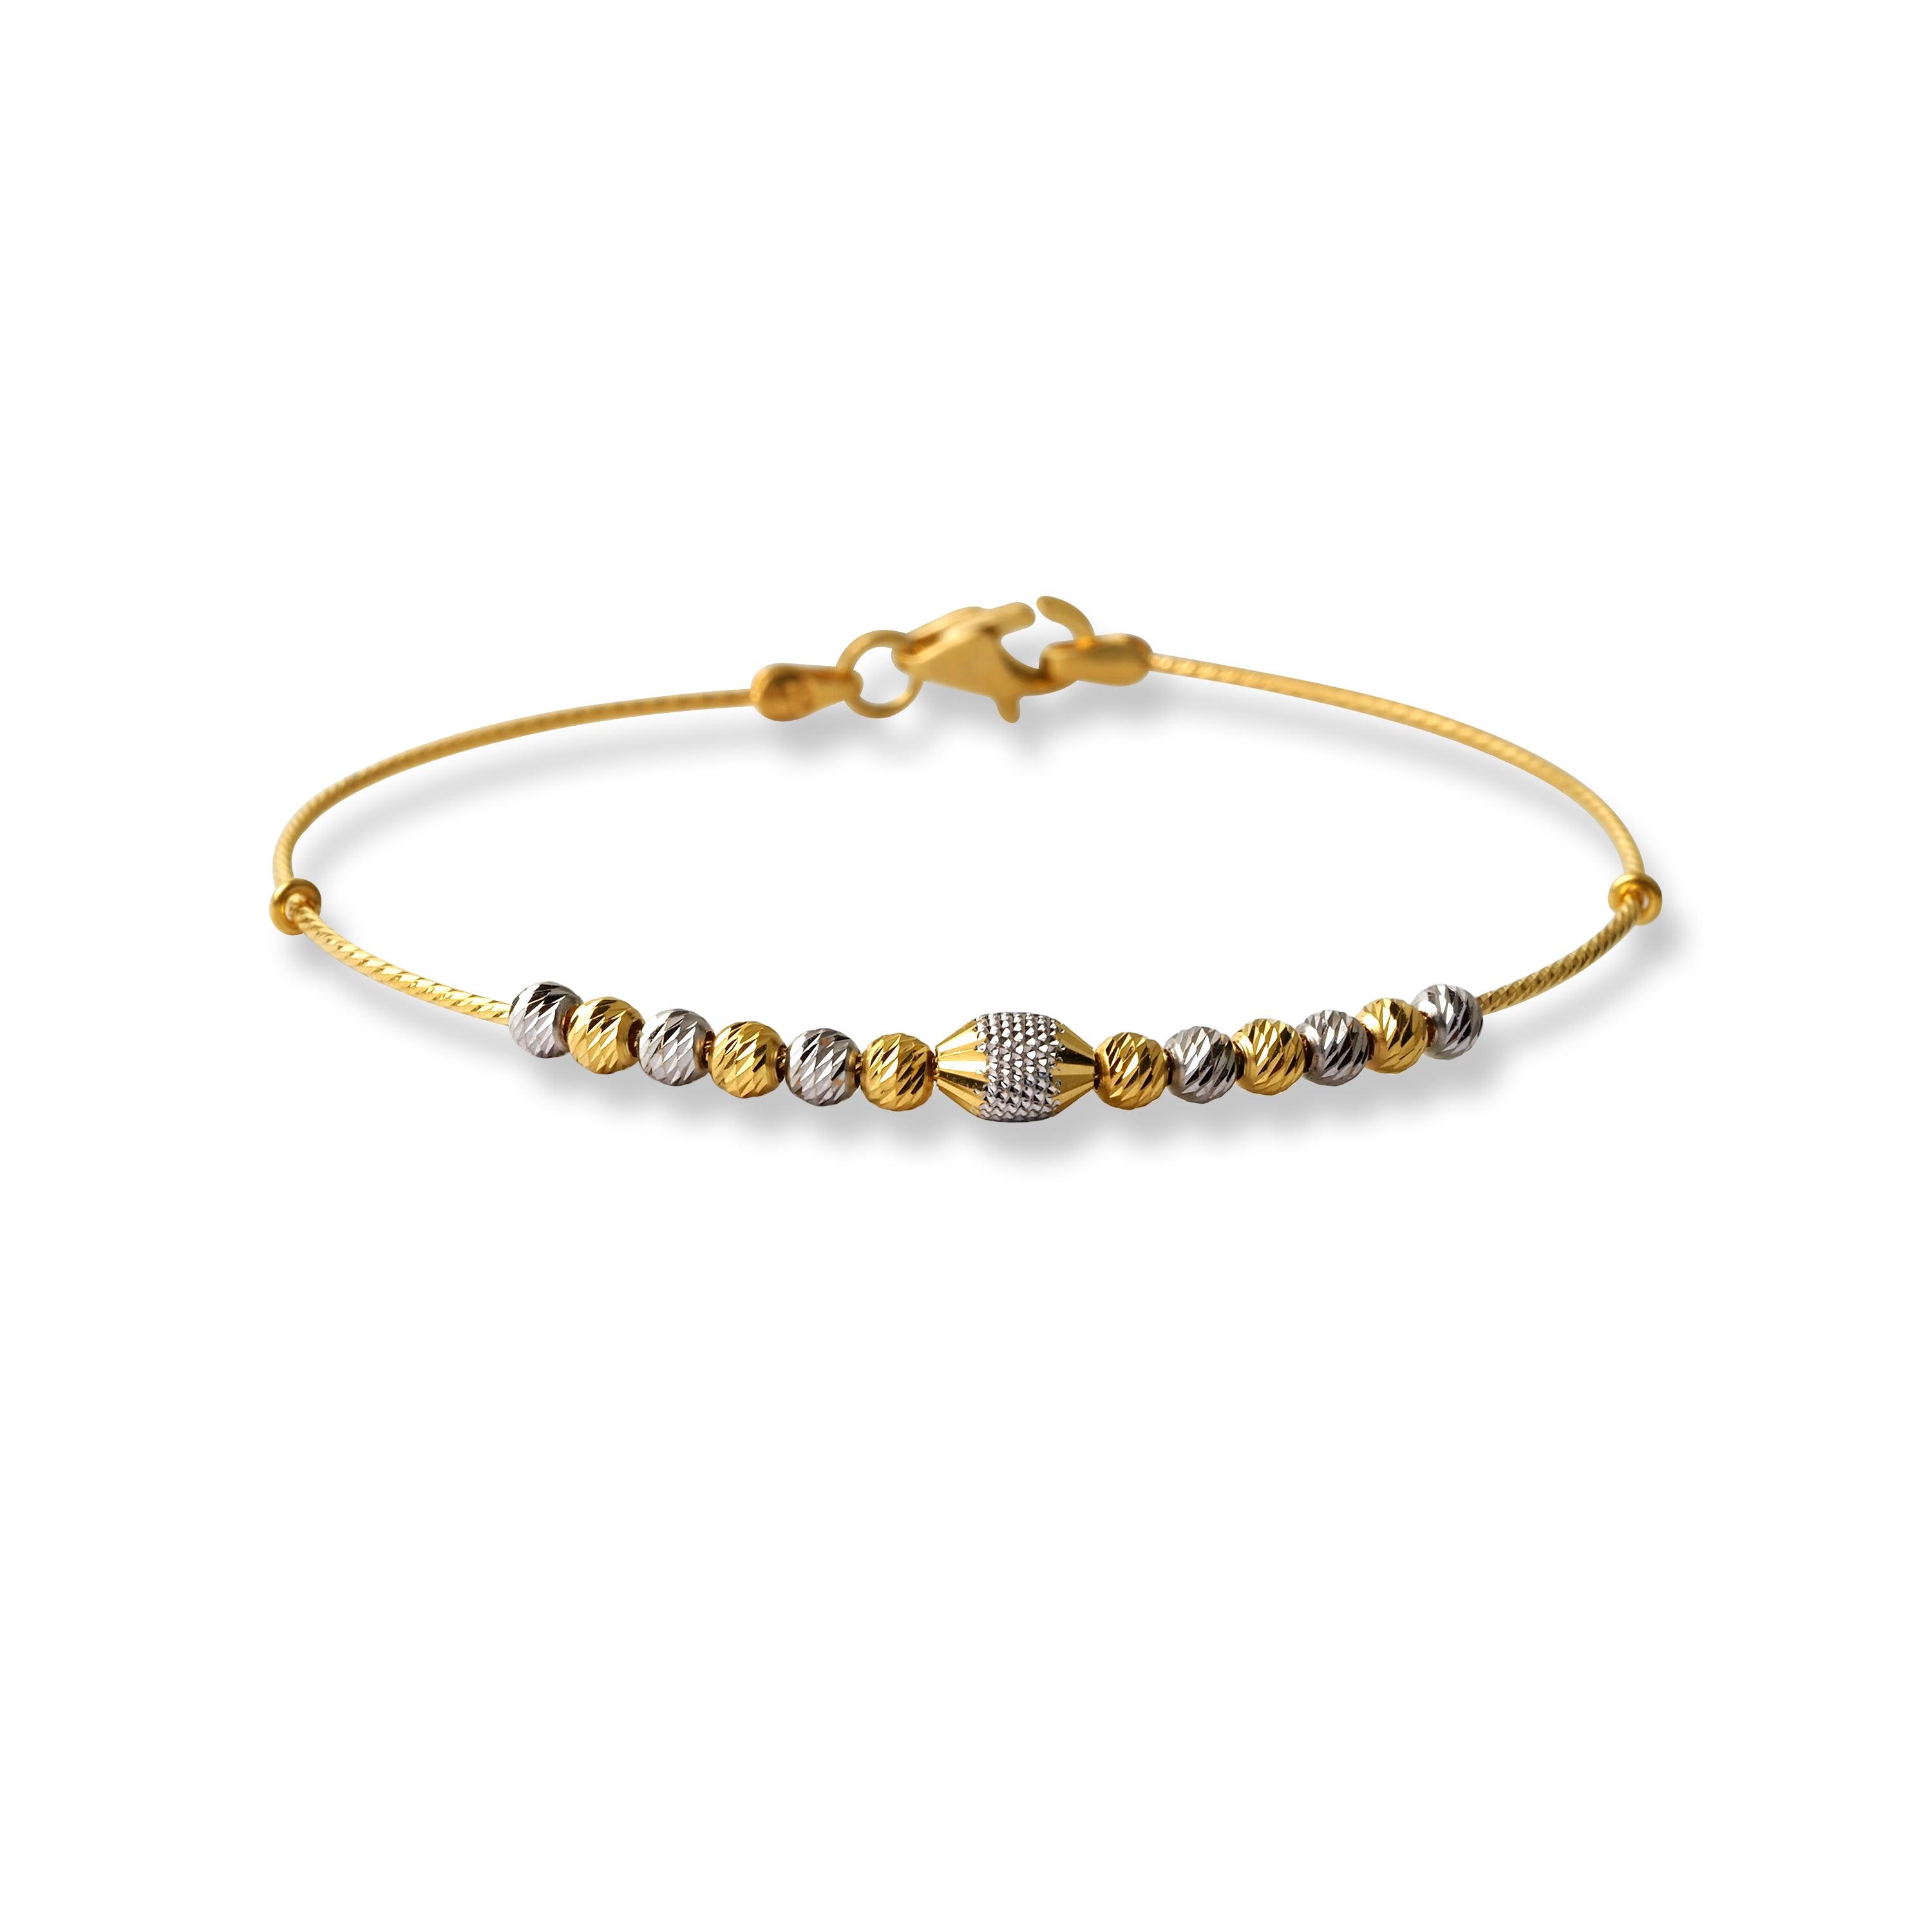 22ct Gold Rhodium Plated Beads Bangle With Rounded Trigger Clasp (4.1G) B-8524 - Minar Jewellers